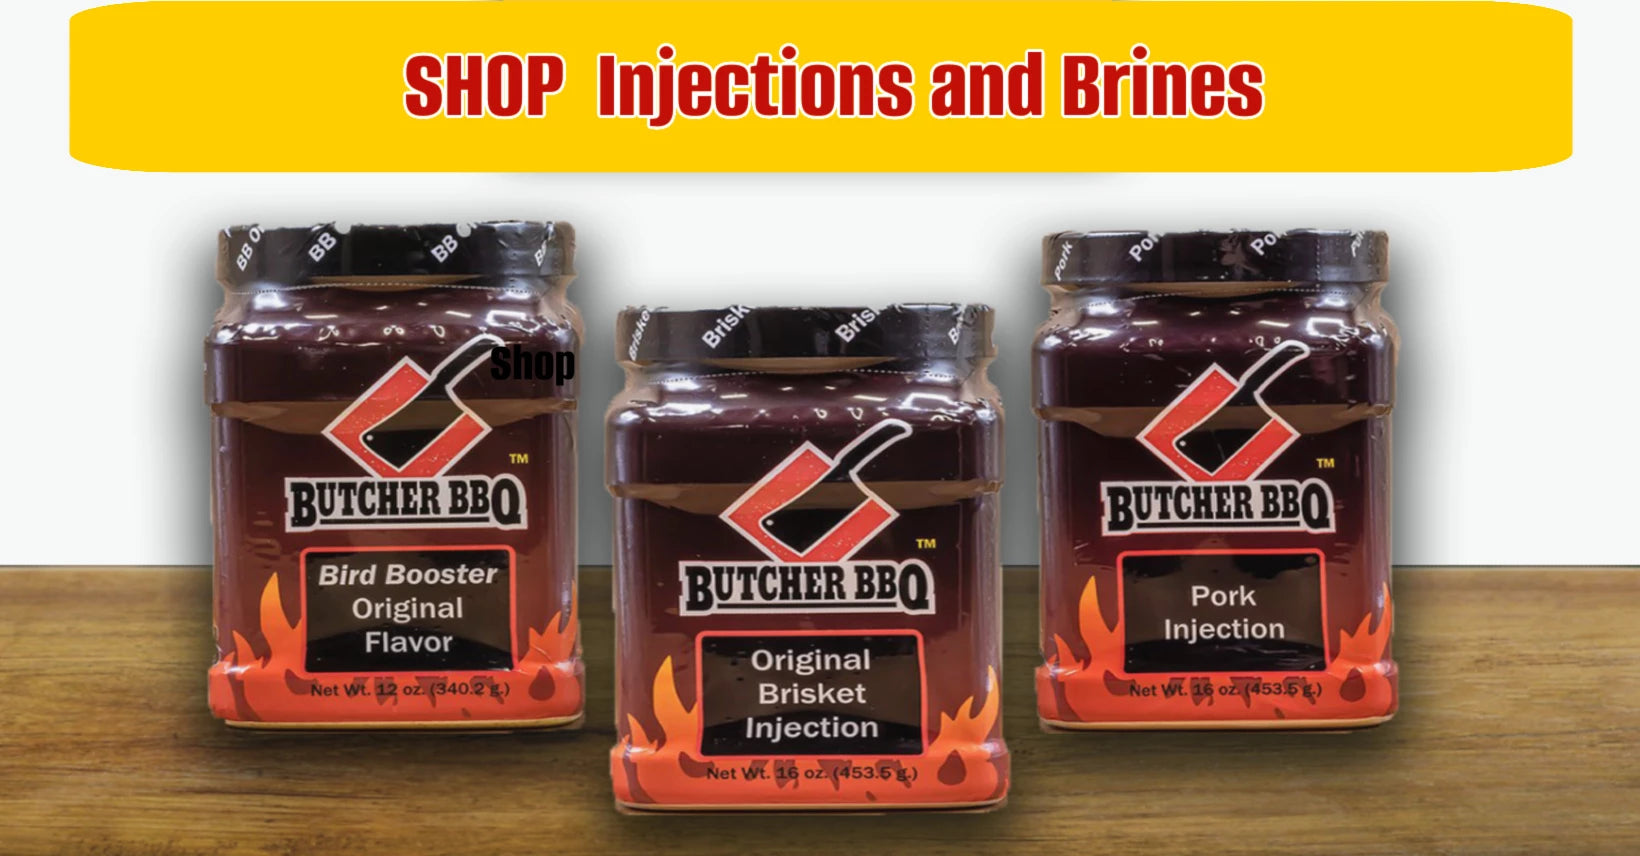 Shop Injections and brines